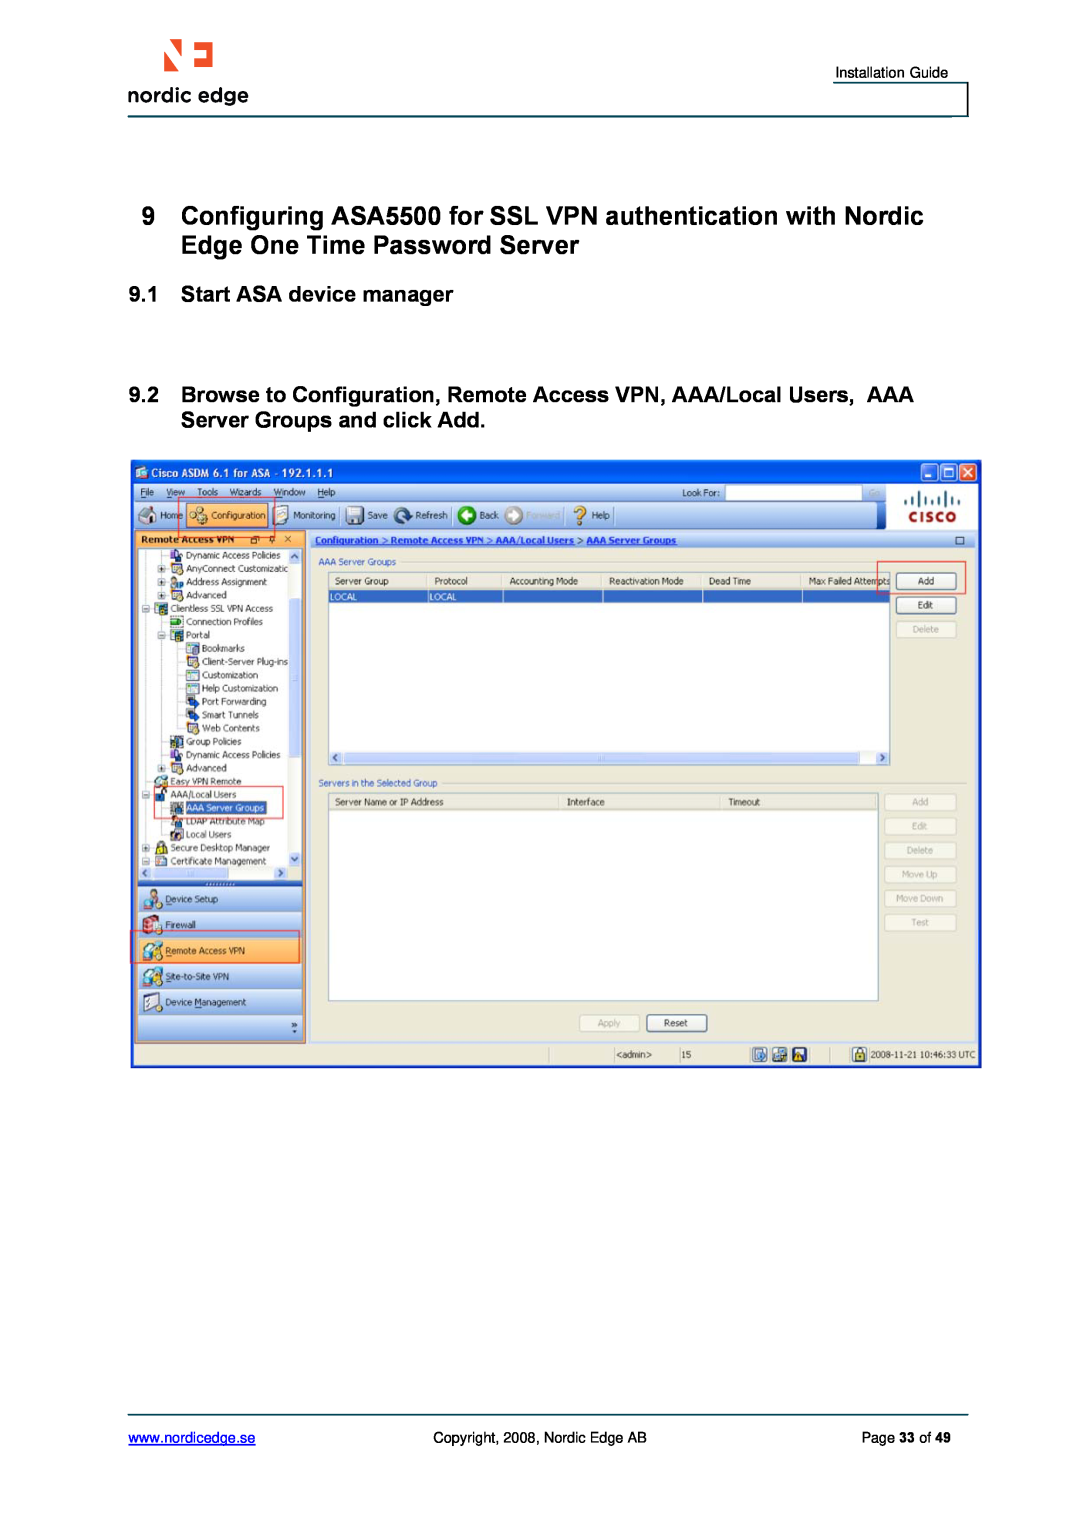 Cisco Systems ASA 5500 manual 9.1Start ASA device manager, Installation Guide, Copyright, 2008, Nordic Edge AB, Page 33 of 